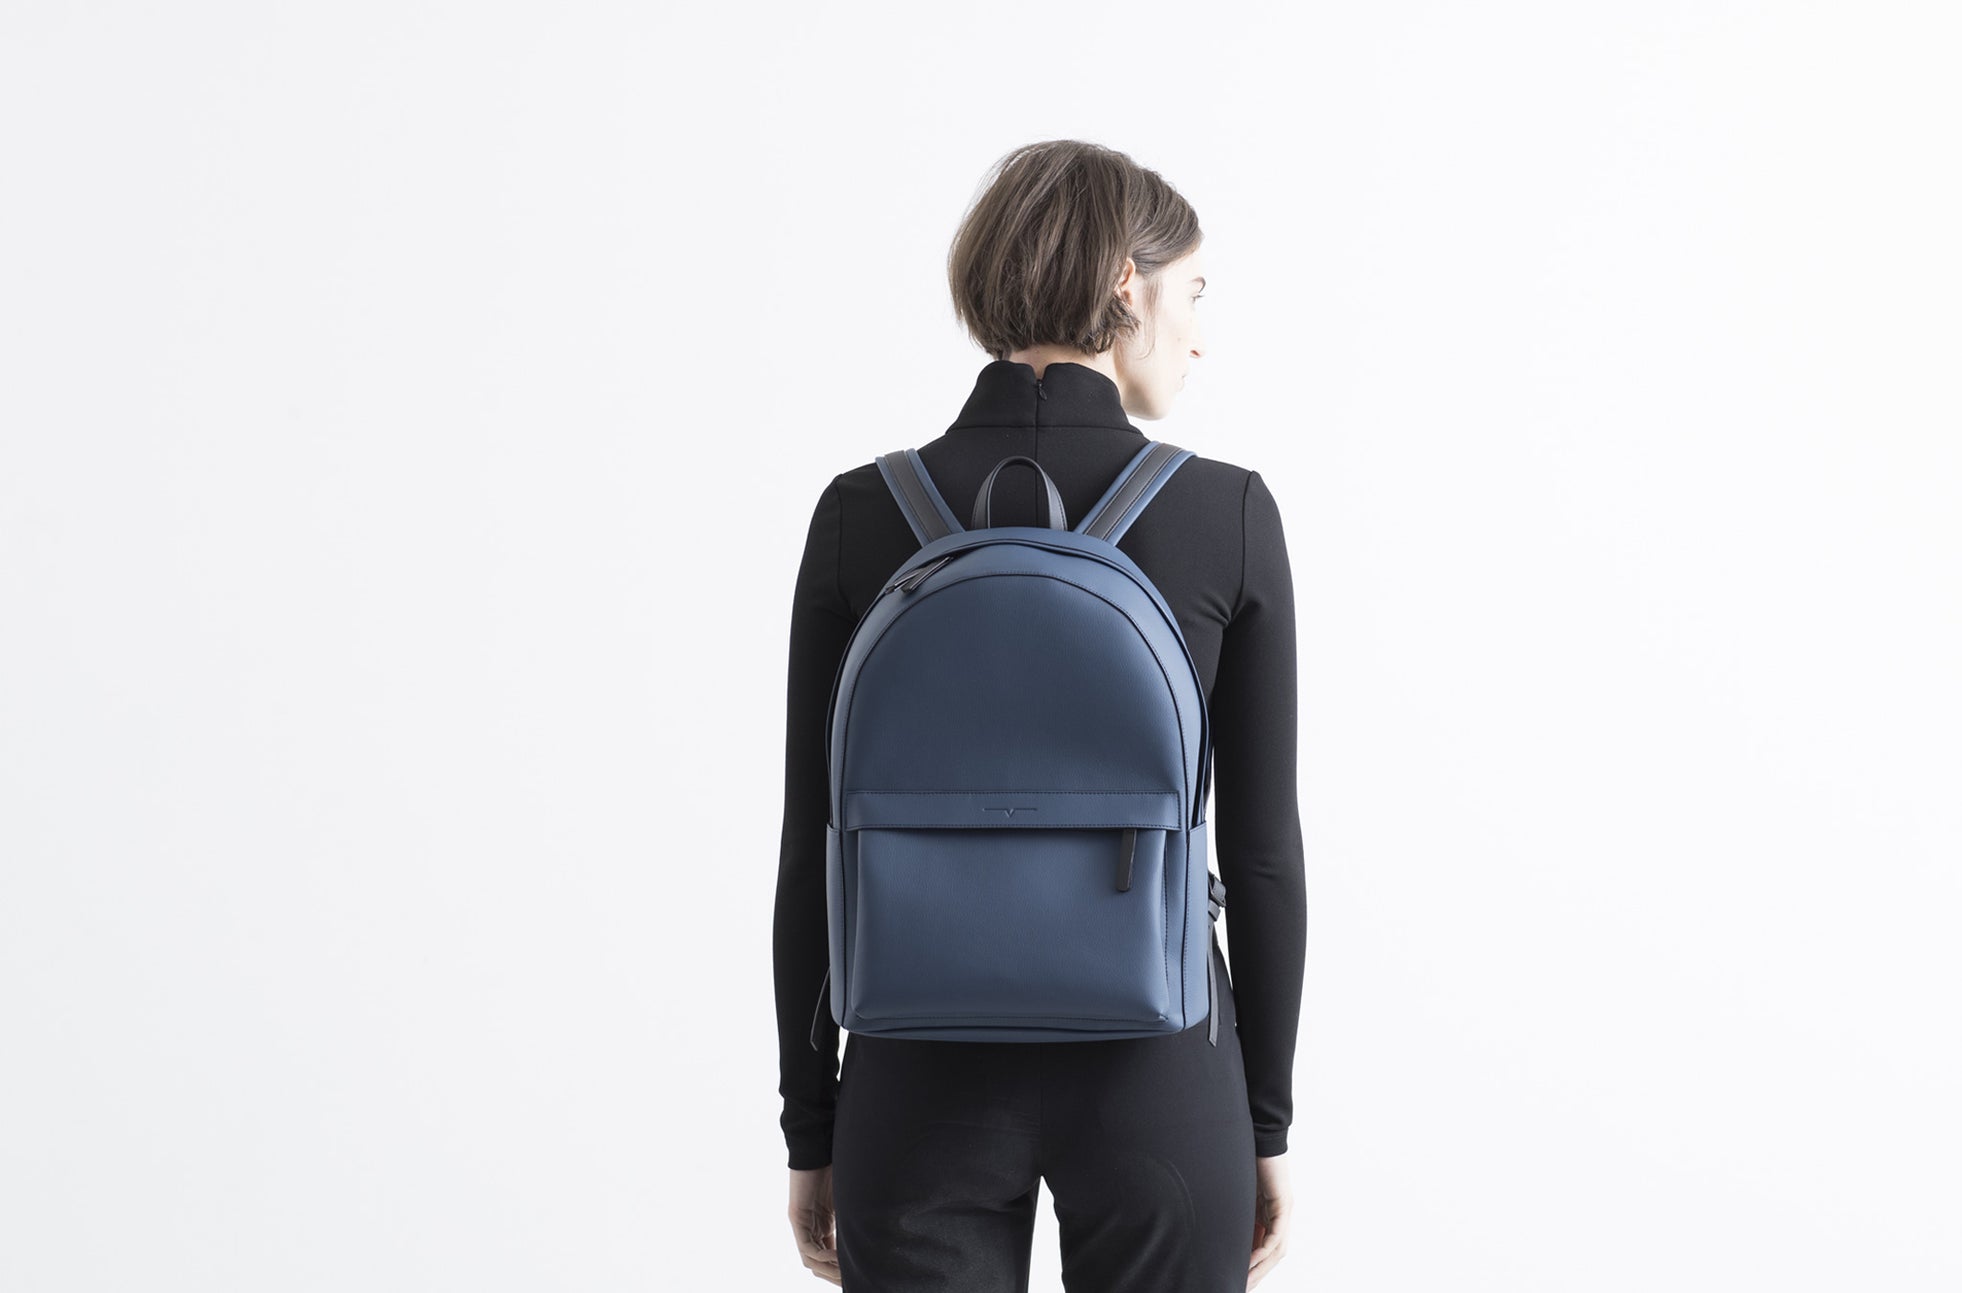 The Classic Backpack in Technik in Denim and Black image 9